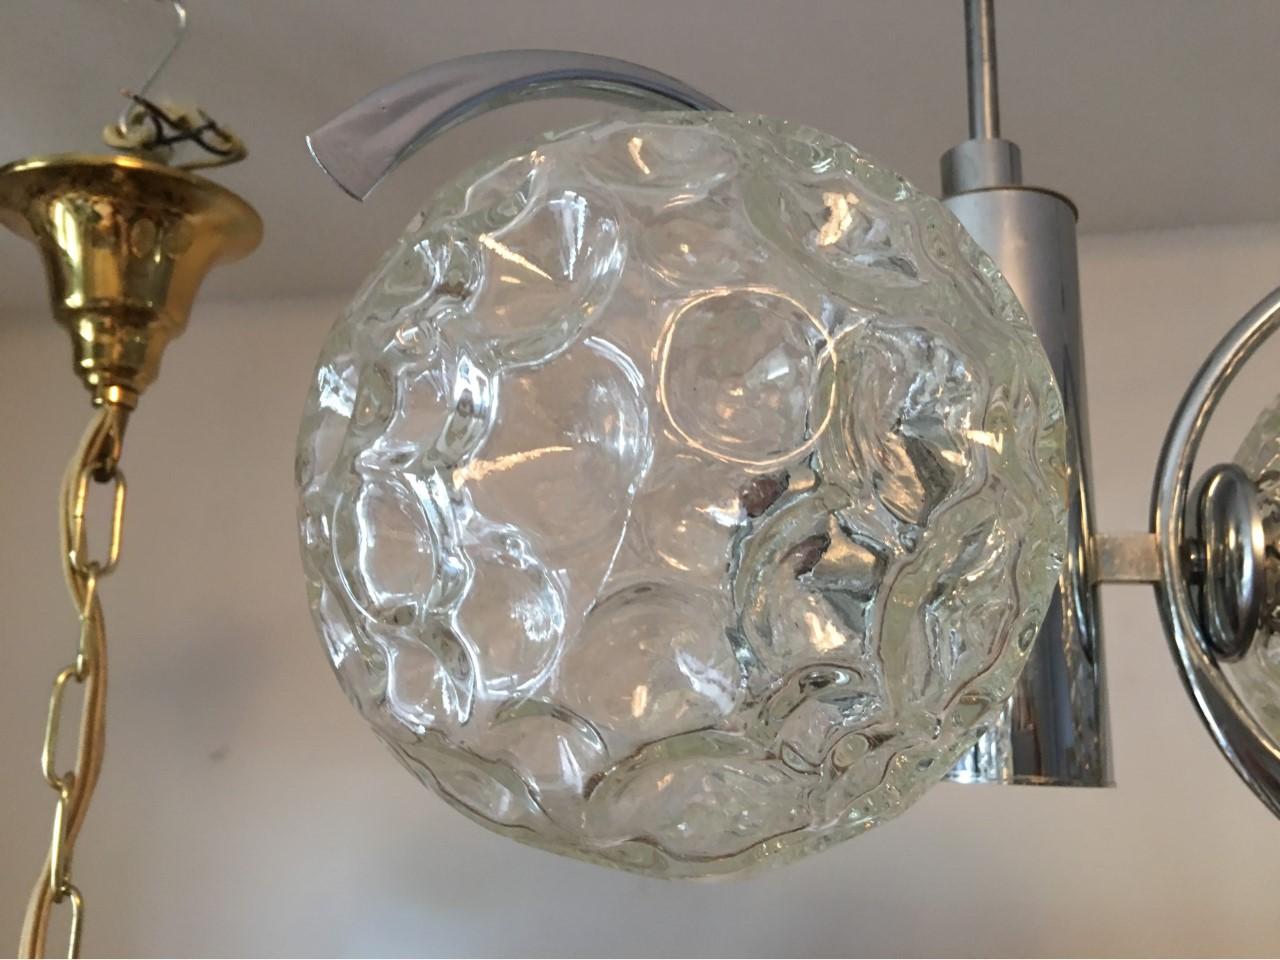 From 1960s Italy. A lovely chandelier in chrome with three cratered glass balls creating lovely lighting effect. The fixture requires three European E14 candelabra bulbs, each bulb up to 40 watts. In good working condition. Equipped with original